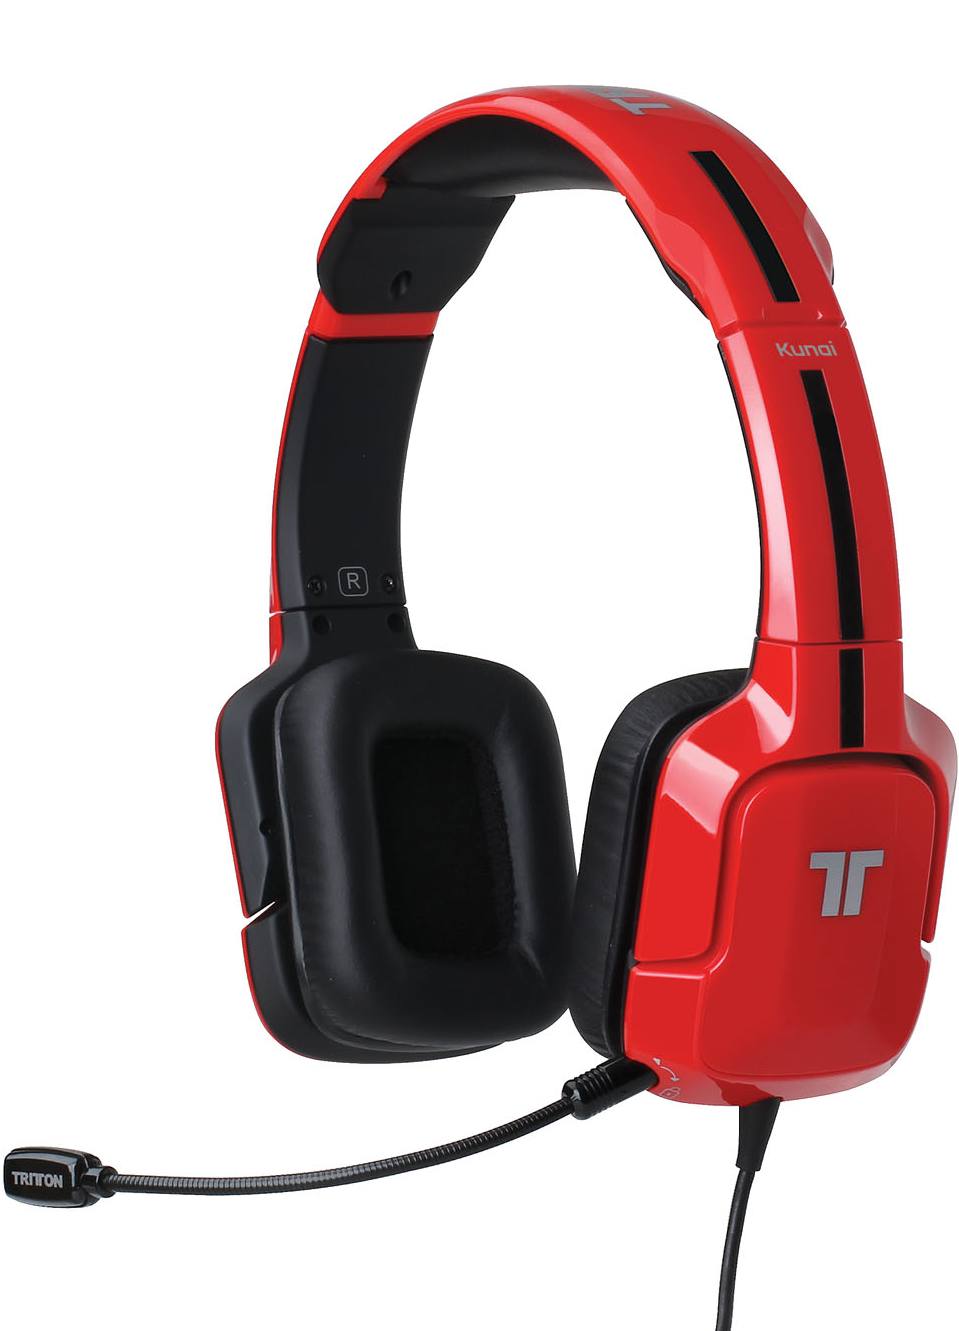 Tritton Kunai Stereo (Red) for PS3, PC & Mac, Wii U, PS4